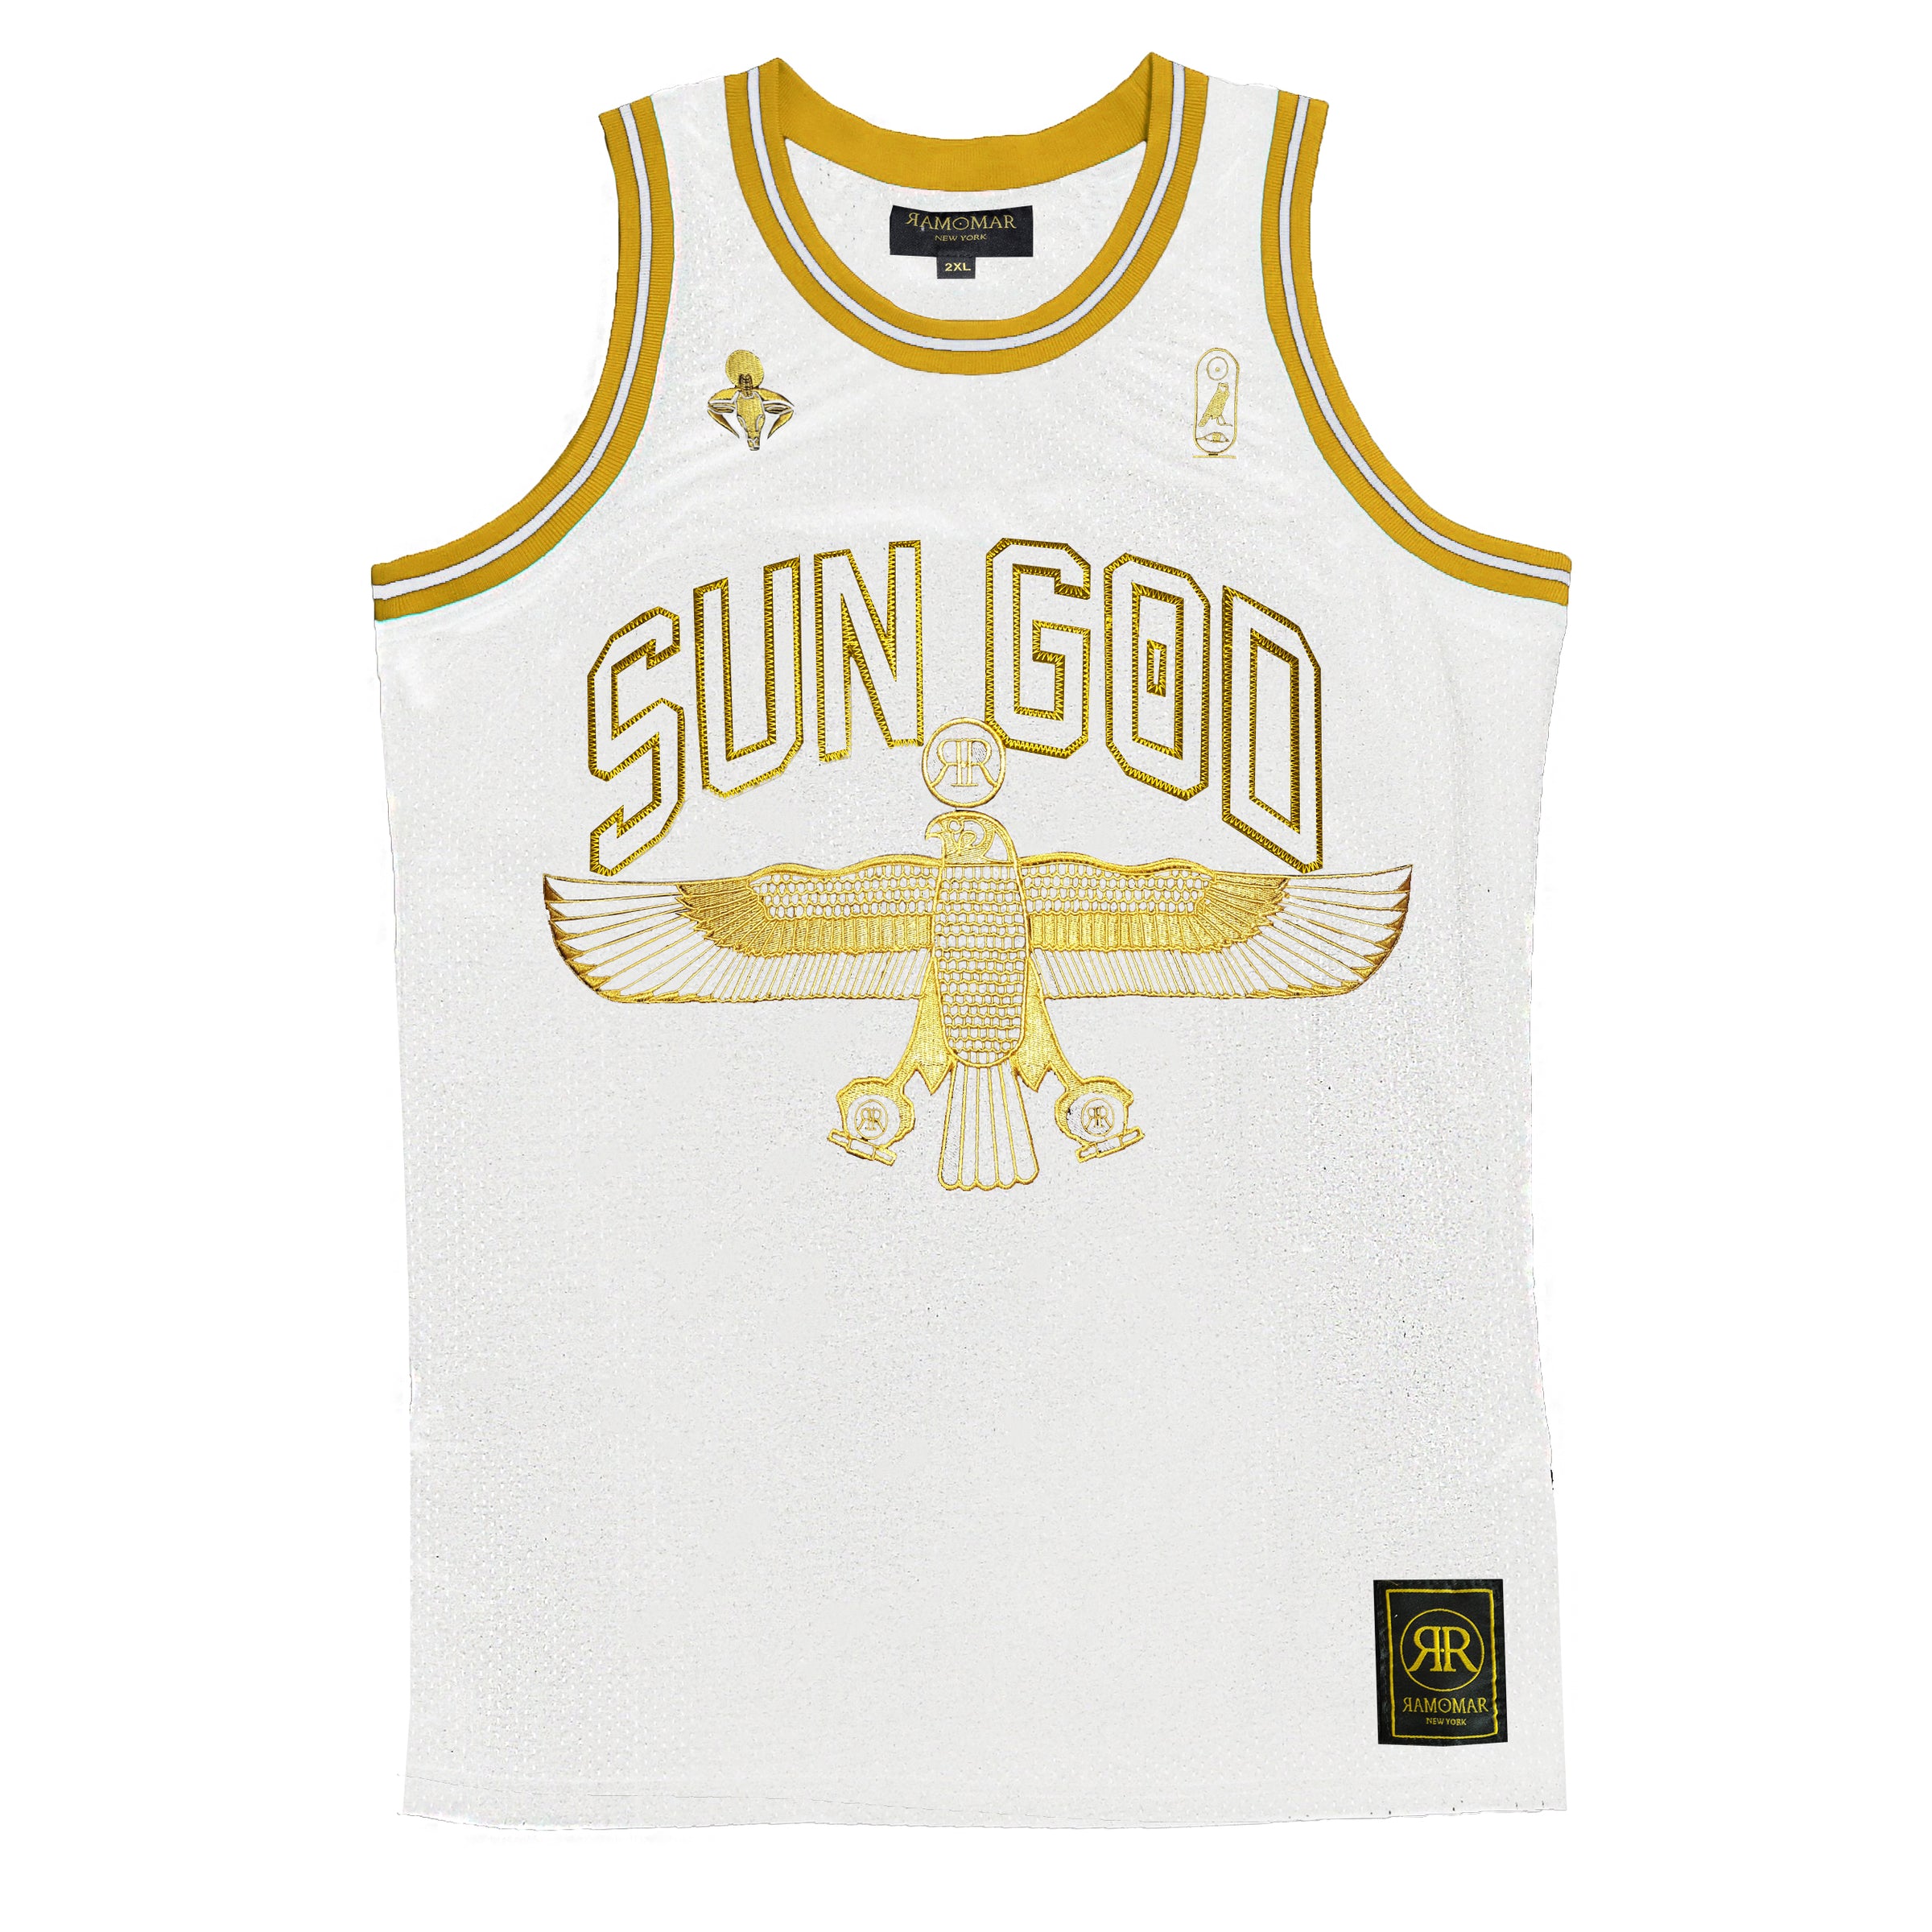 yellow gold jersey